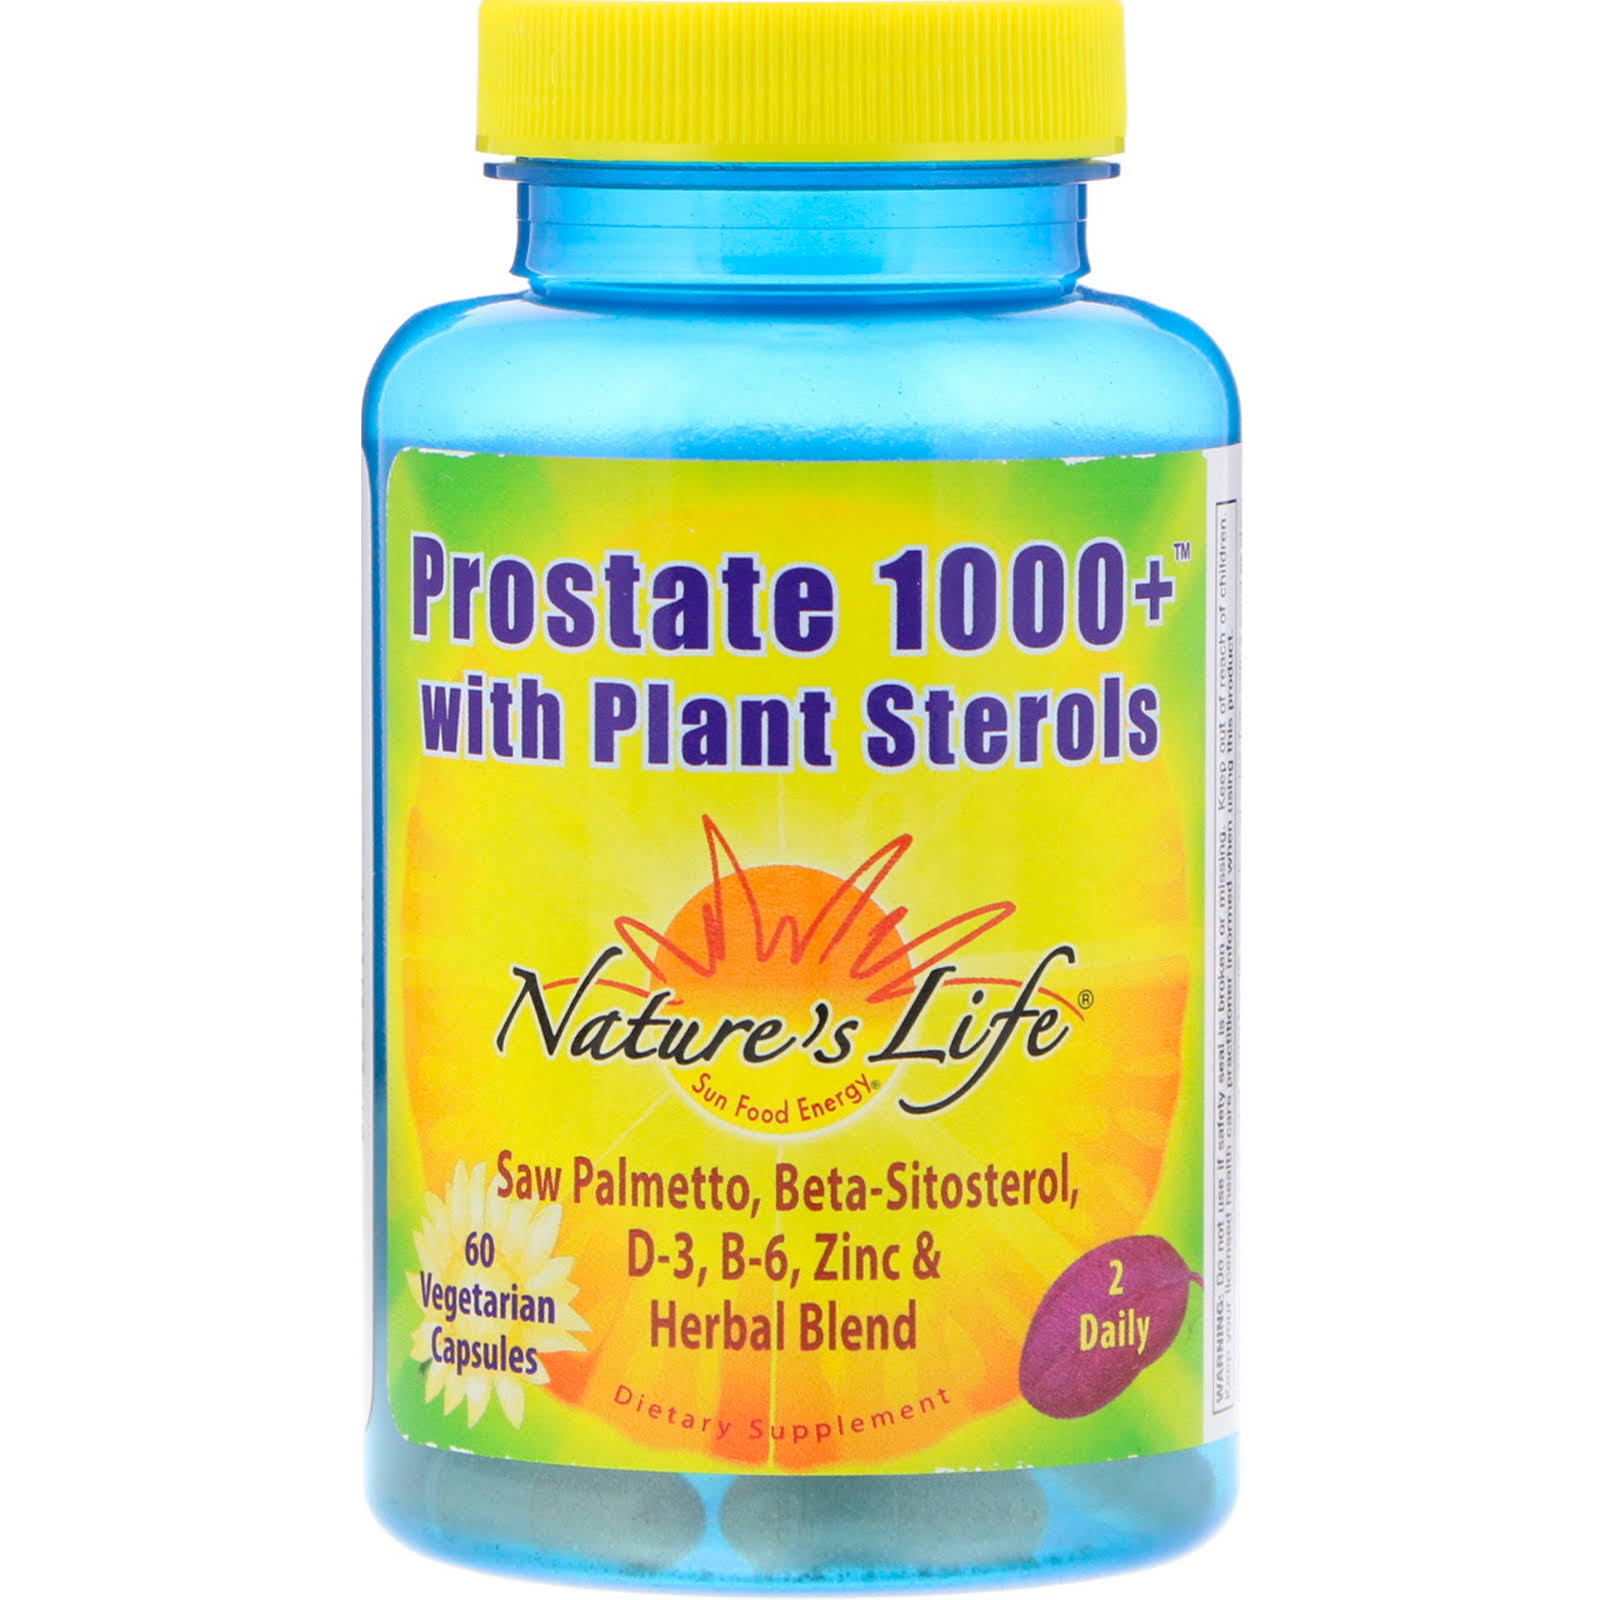 Nature's Life Prostate 1000+ Dietary Supplement - with Plant Sterols, 60ct